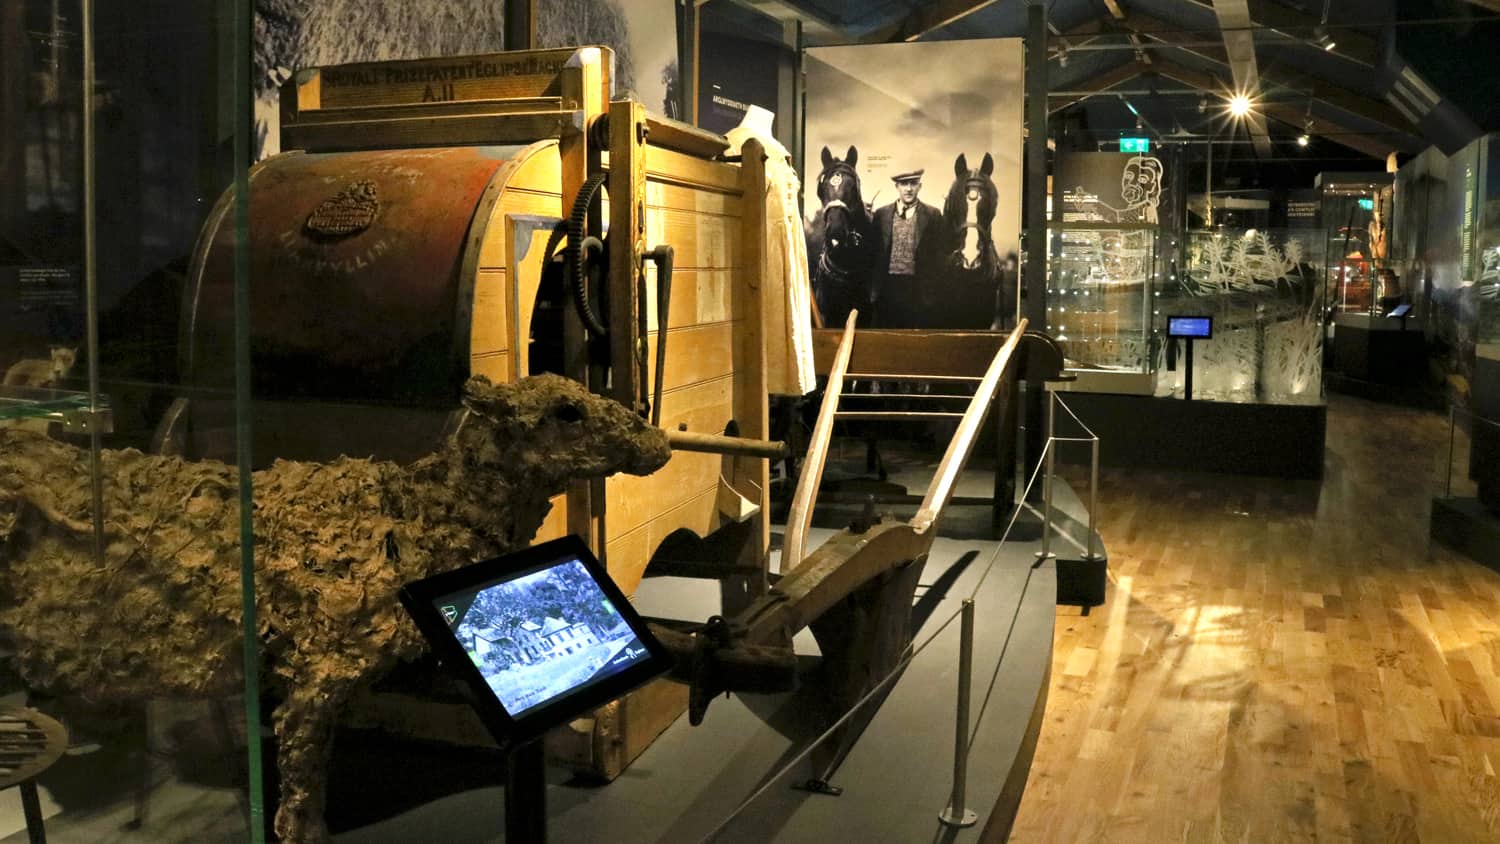 Android Tablets installed in the y Gaer Museum in Brecknock